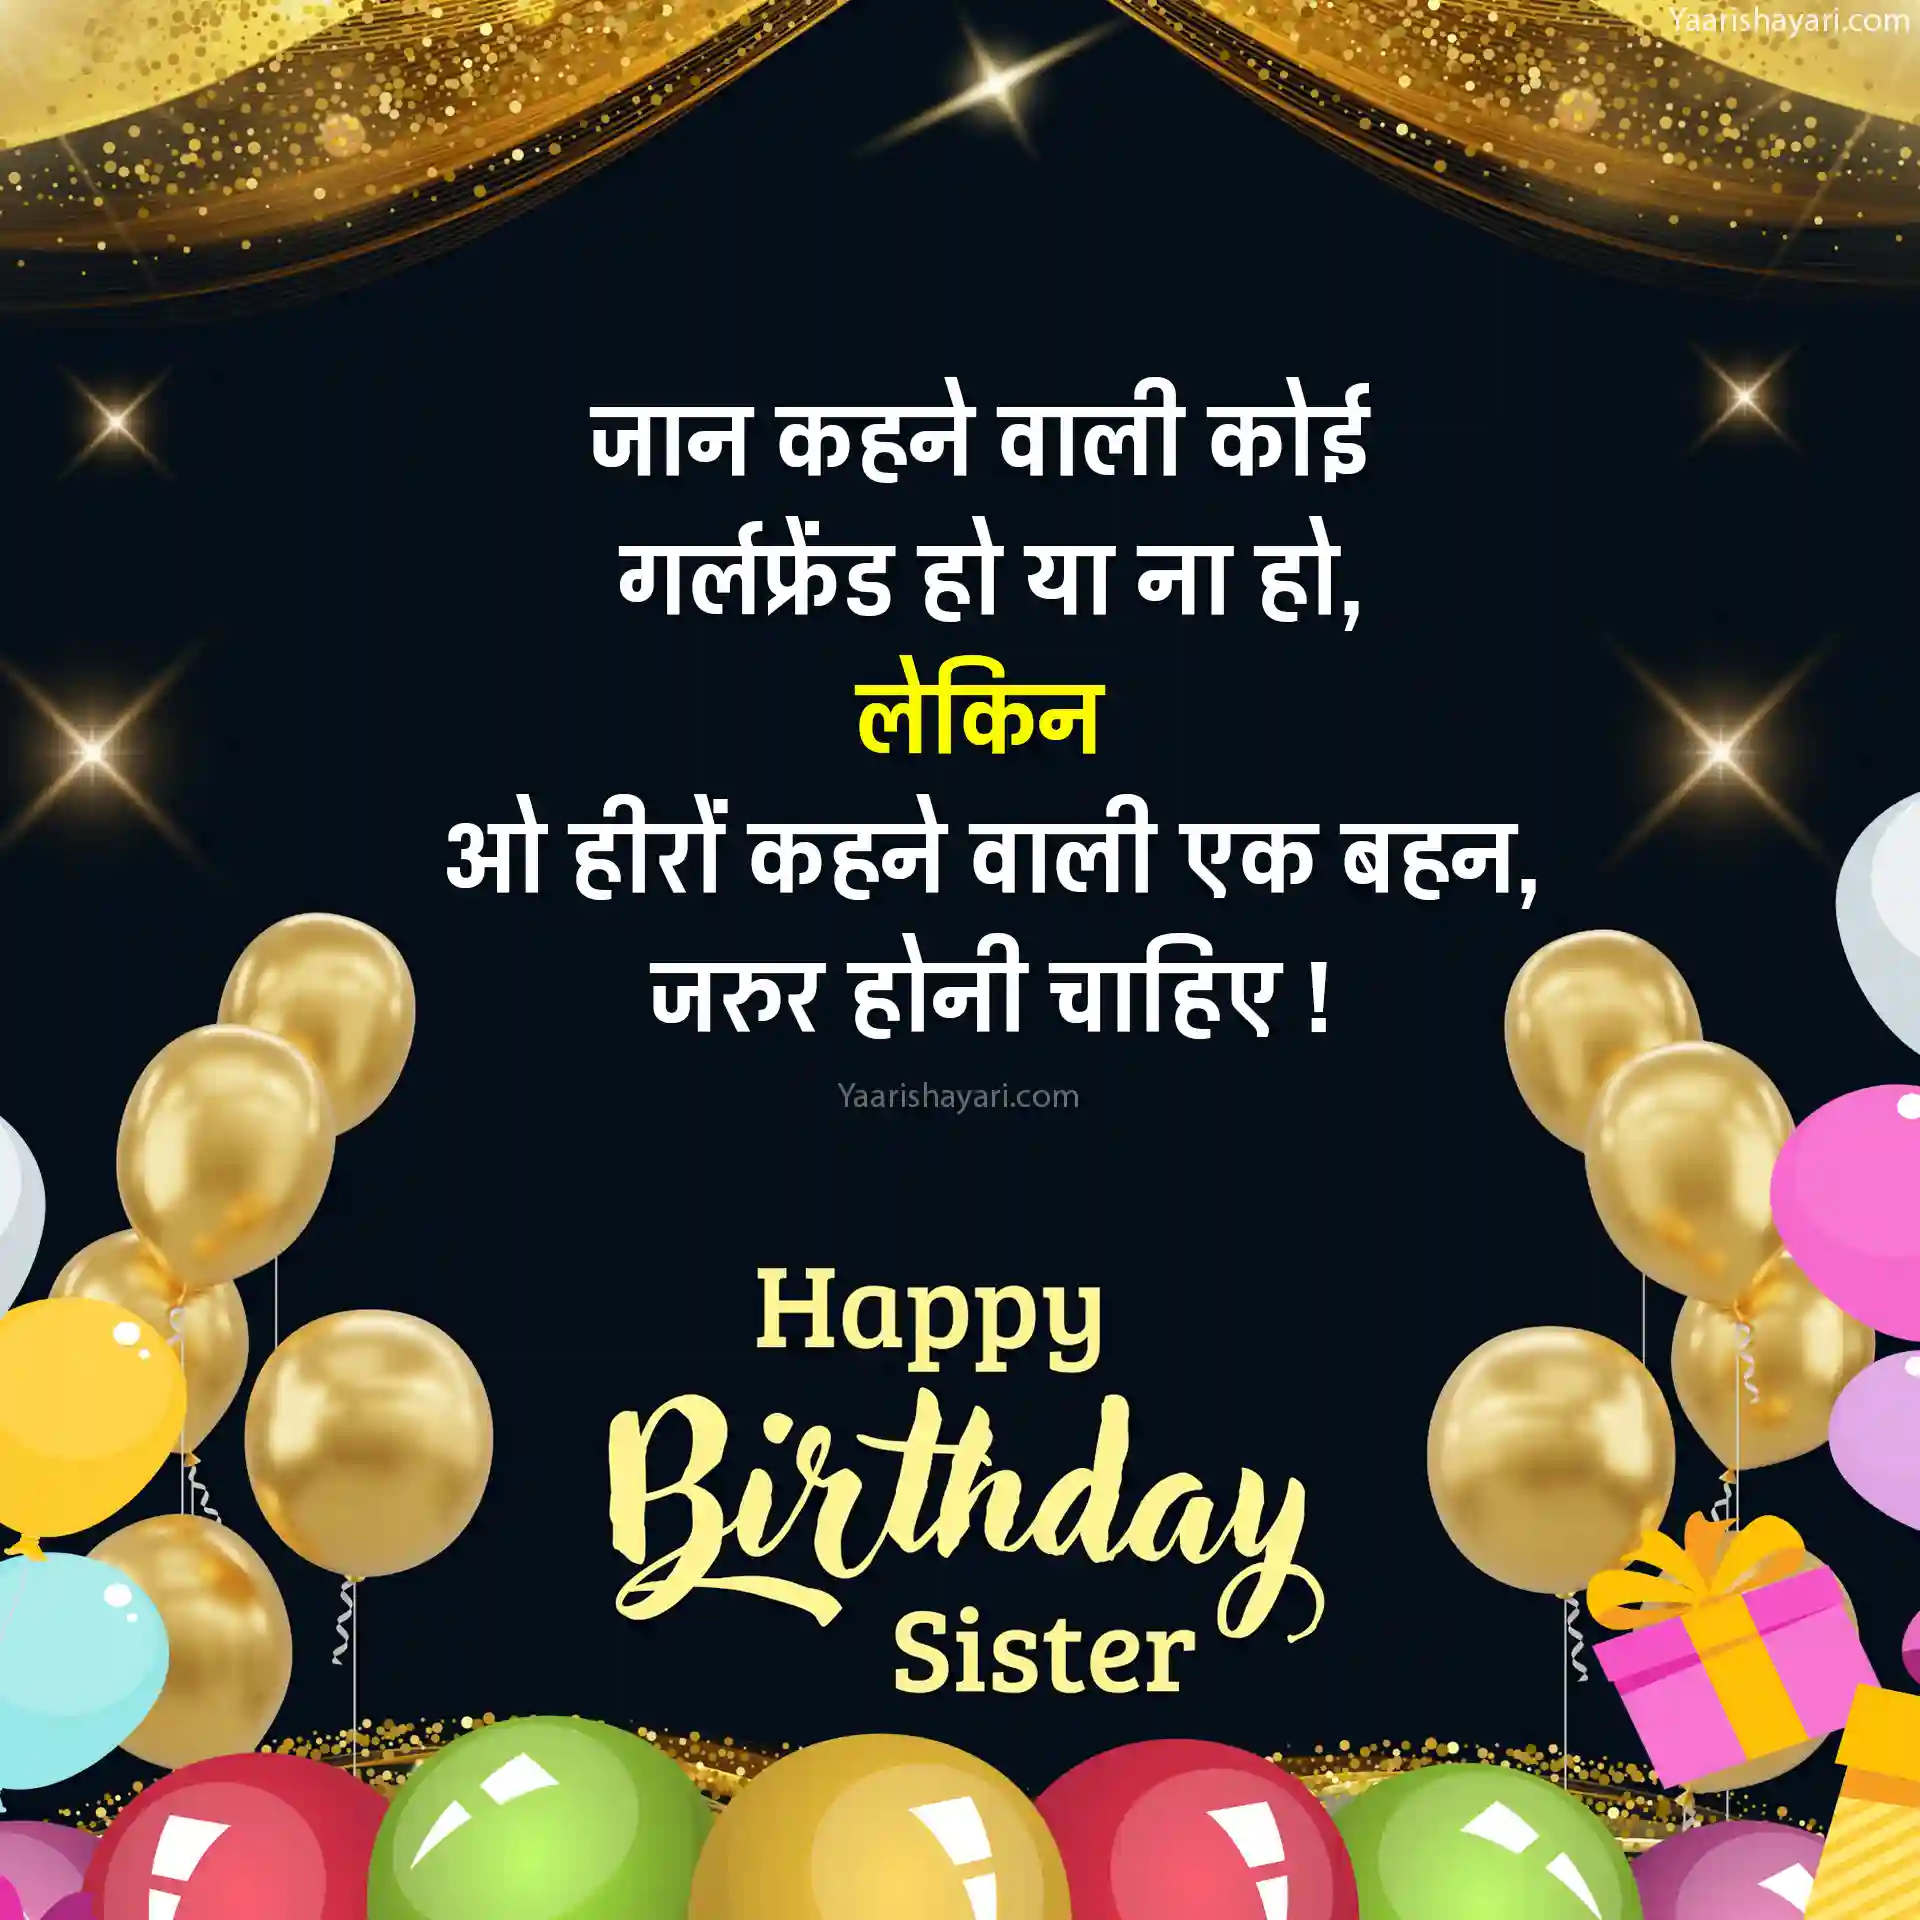 Sisster Birthday Wishes in Hindi